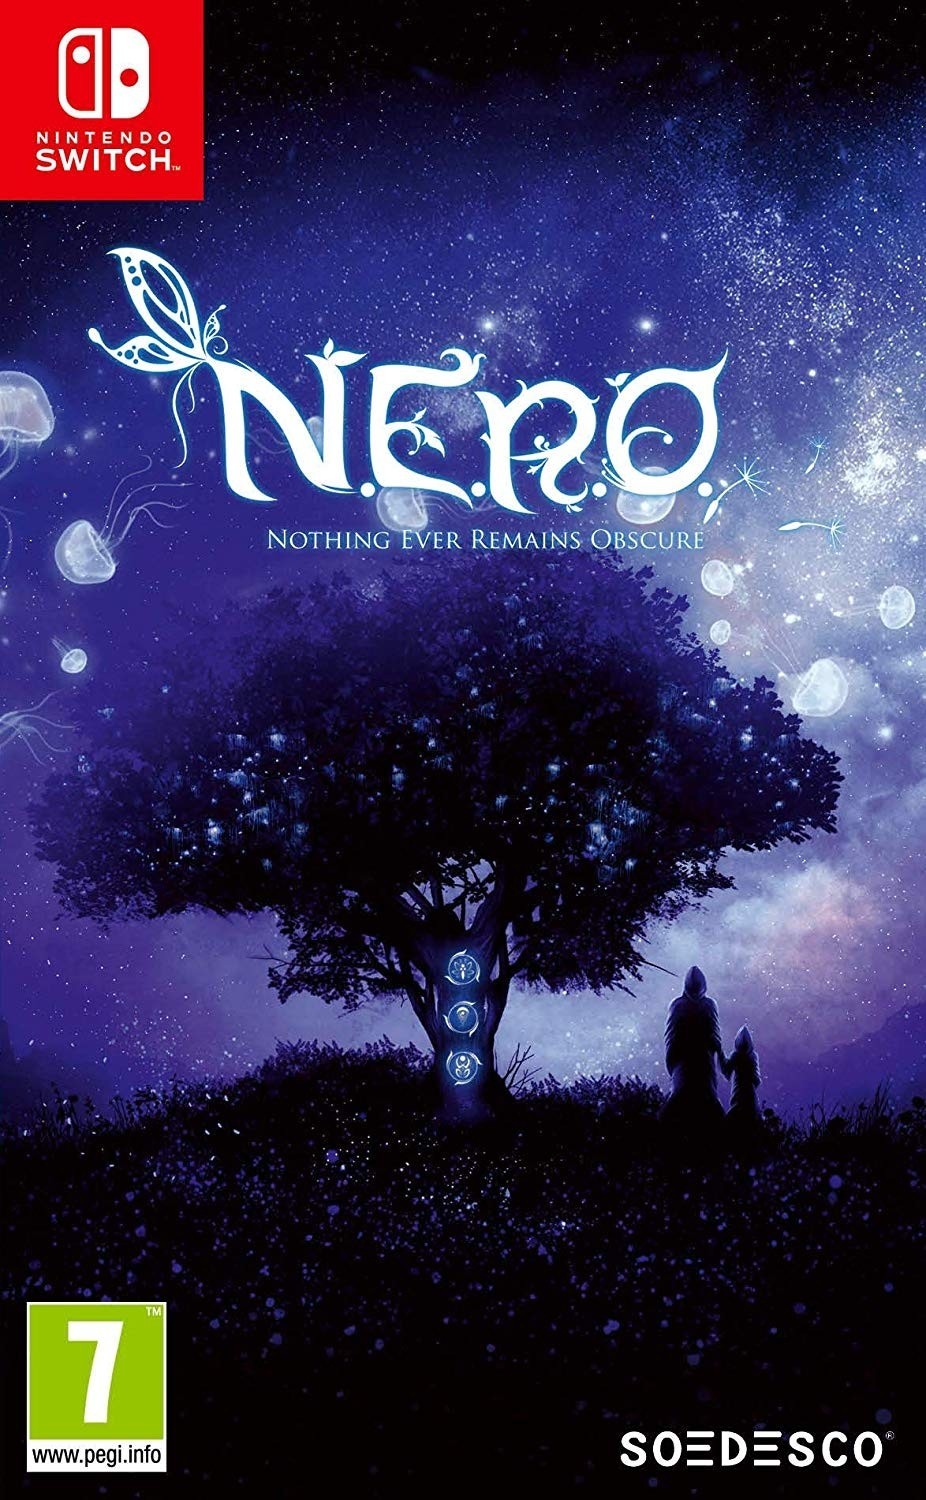 NERO: Nothing Ever Remains Obscure (Switch), Storm in a Teacup